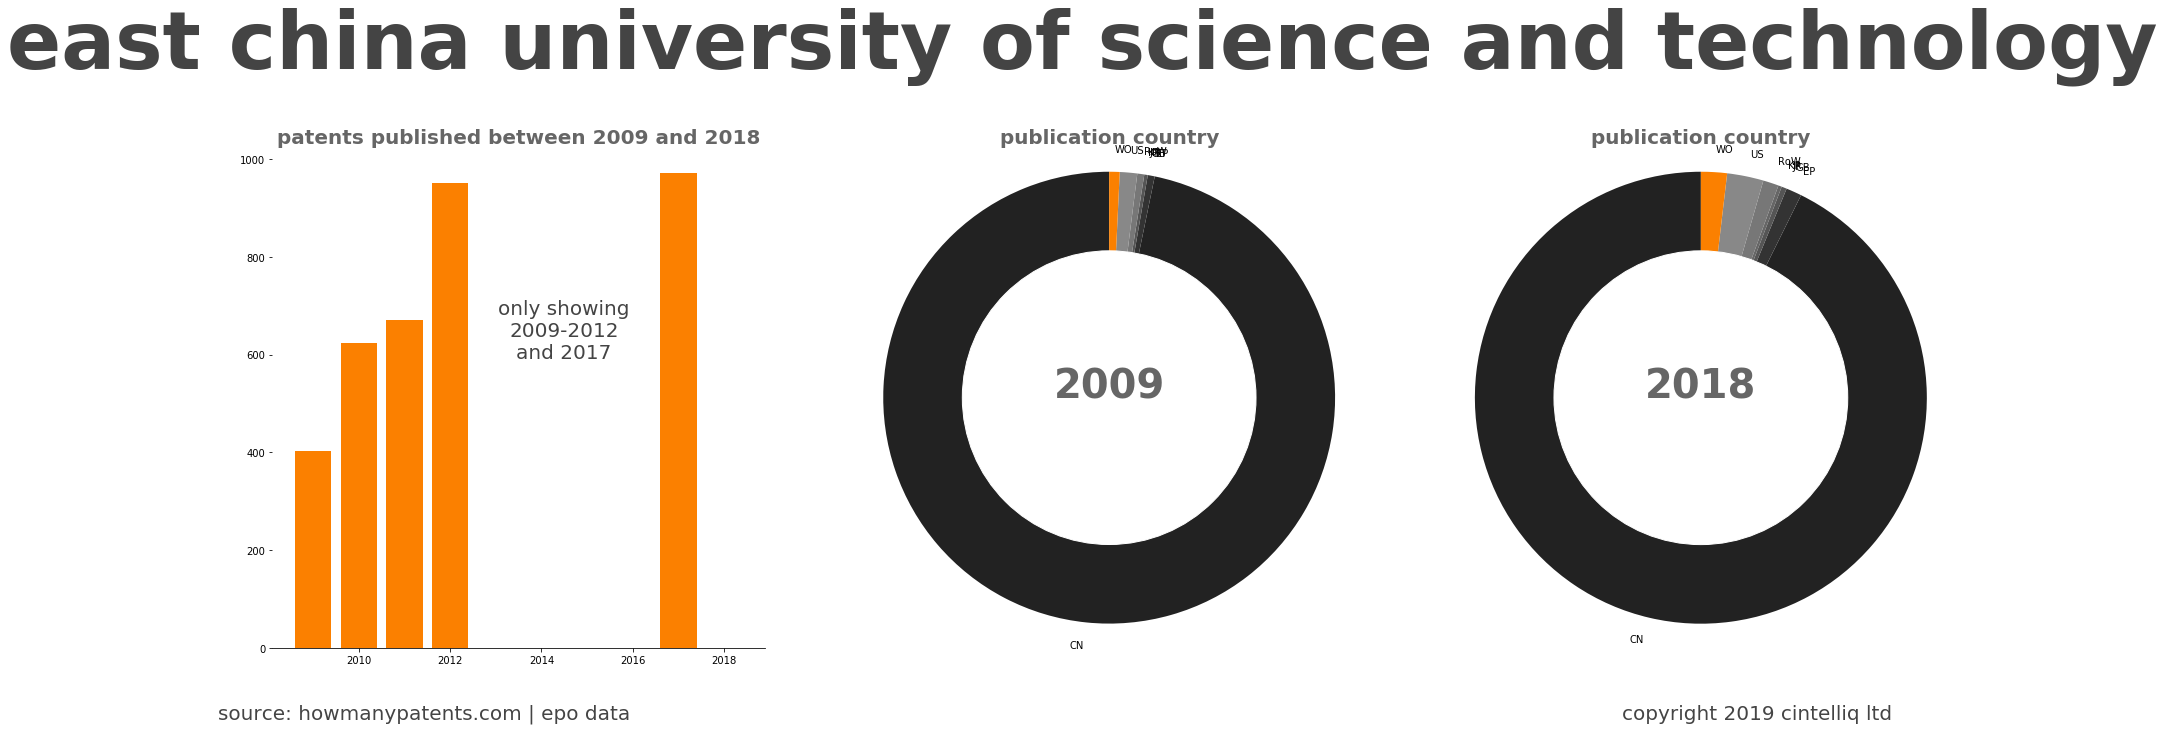 summary of patents for East China University Of Science And Technology